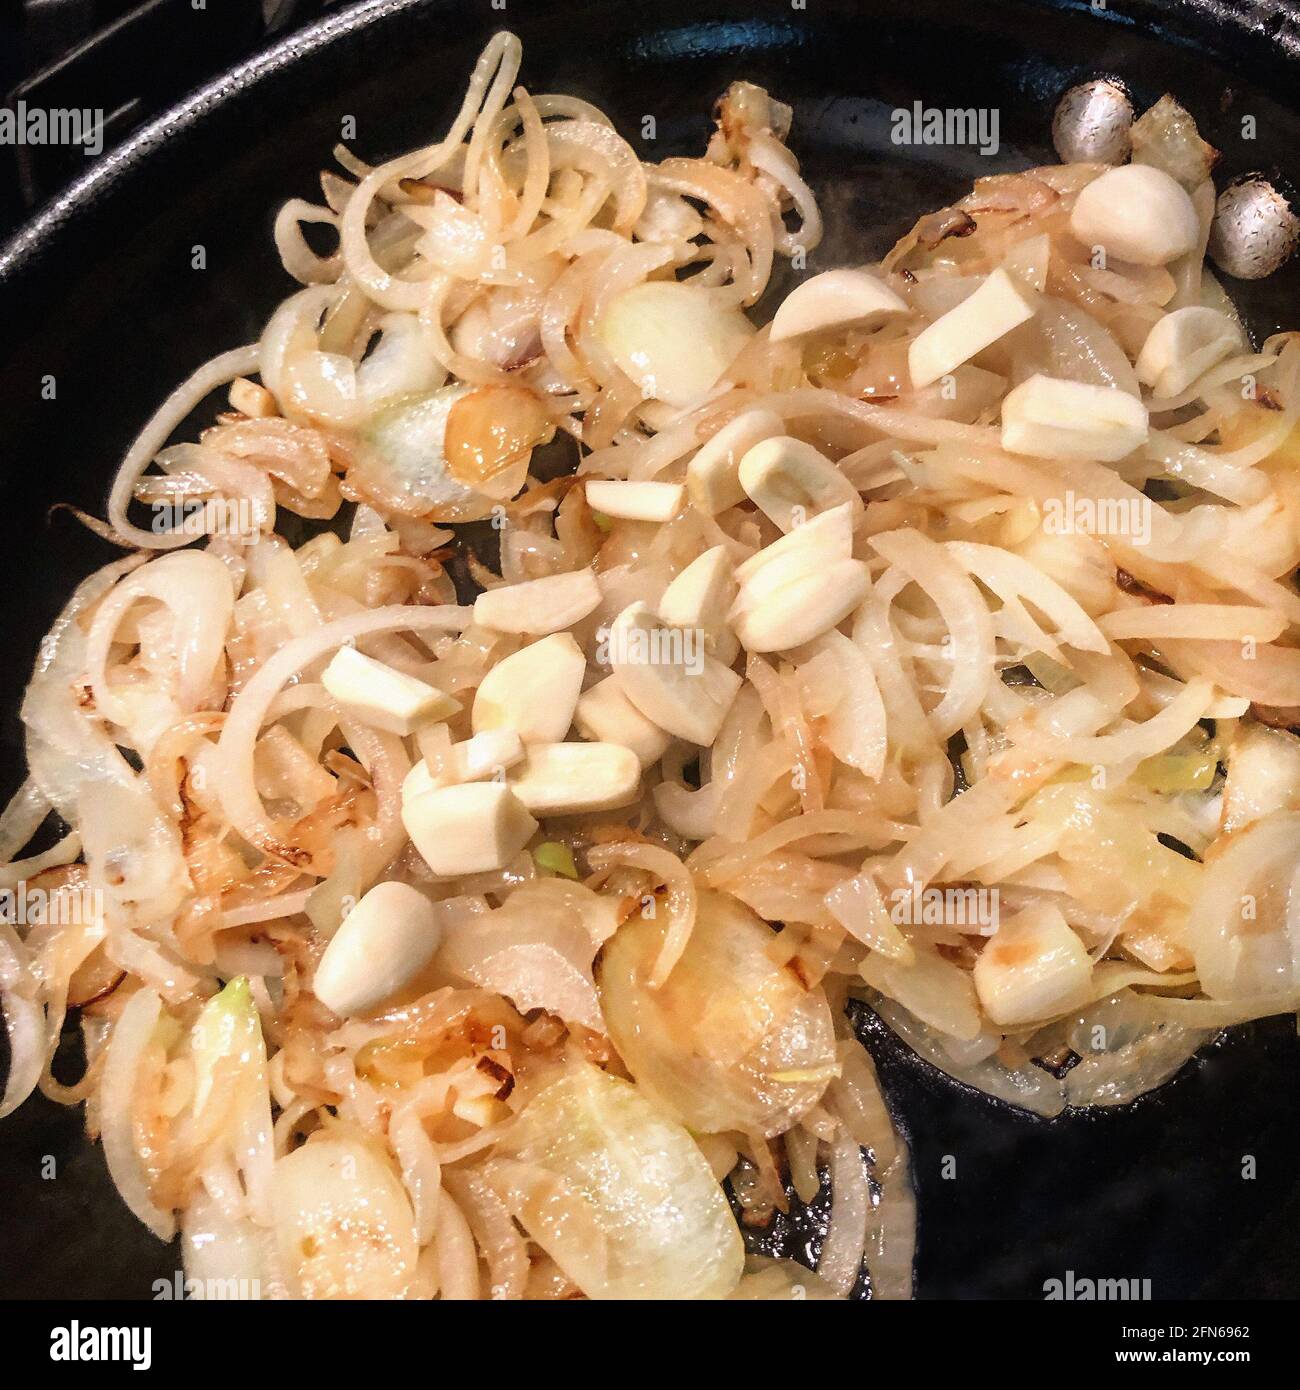 Sauteed Onions and Garlic in Frying Pan Stock Photo